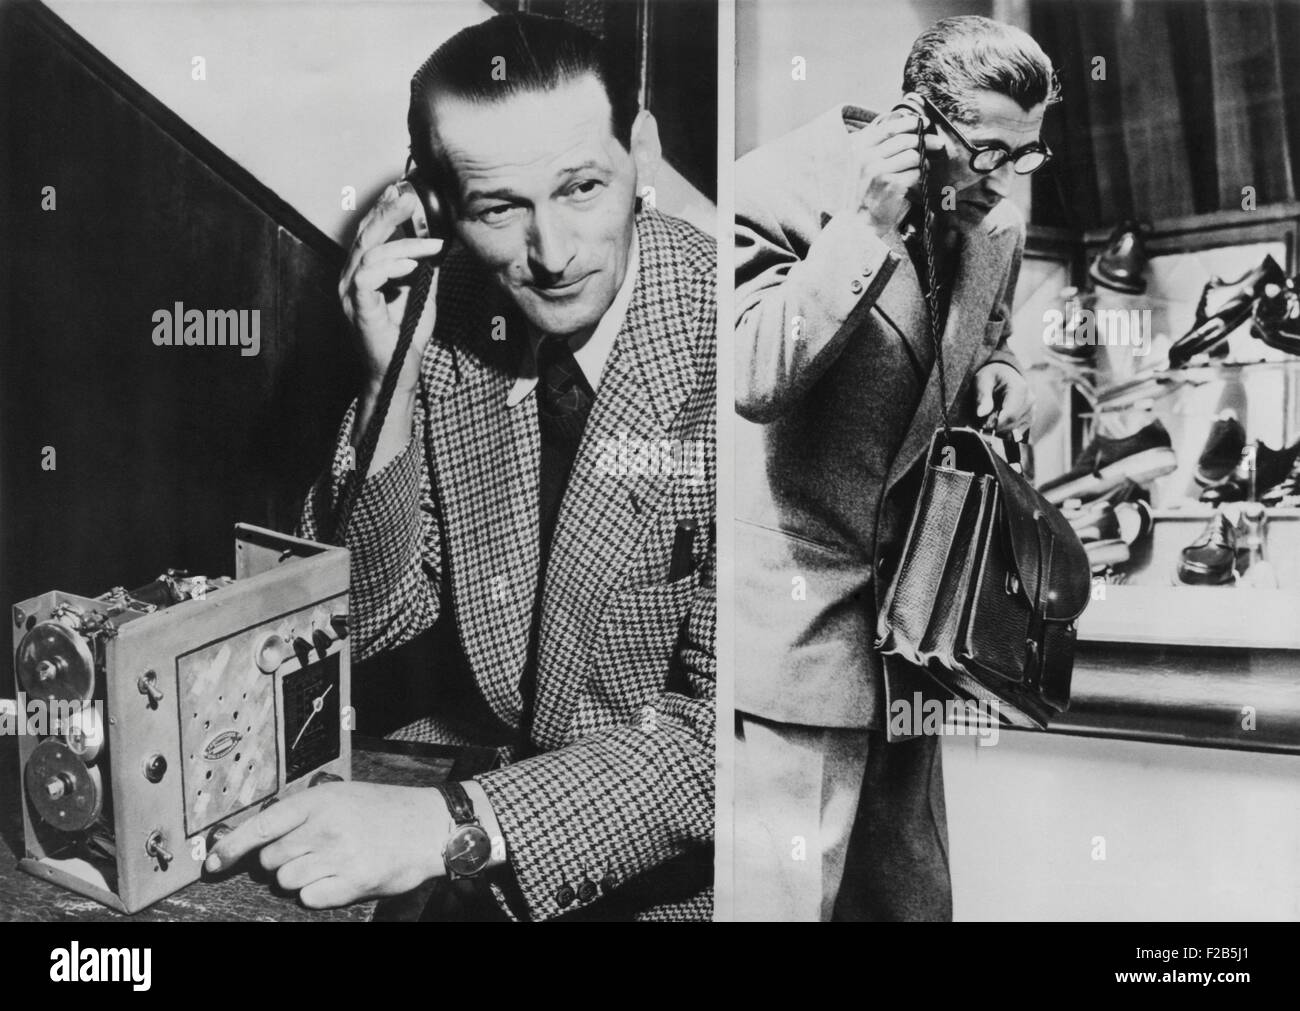 The 'Telephonogramme' was invented by Vital Gassmann. Paris, May 10, 1950. The receiver of this early wireless mobile telephone Stock Photo